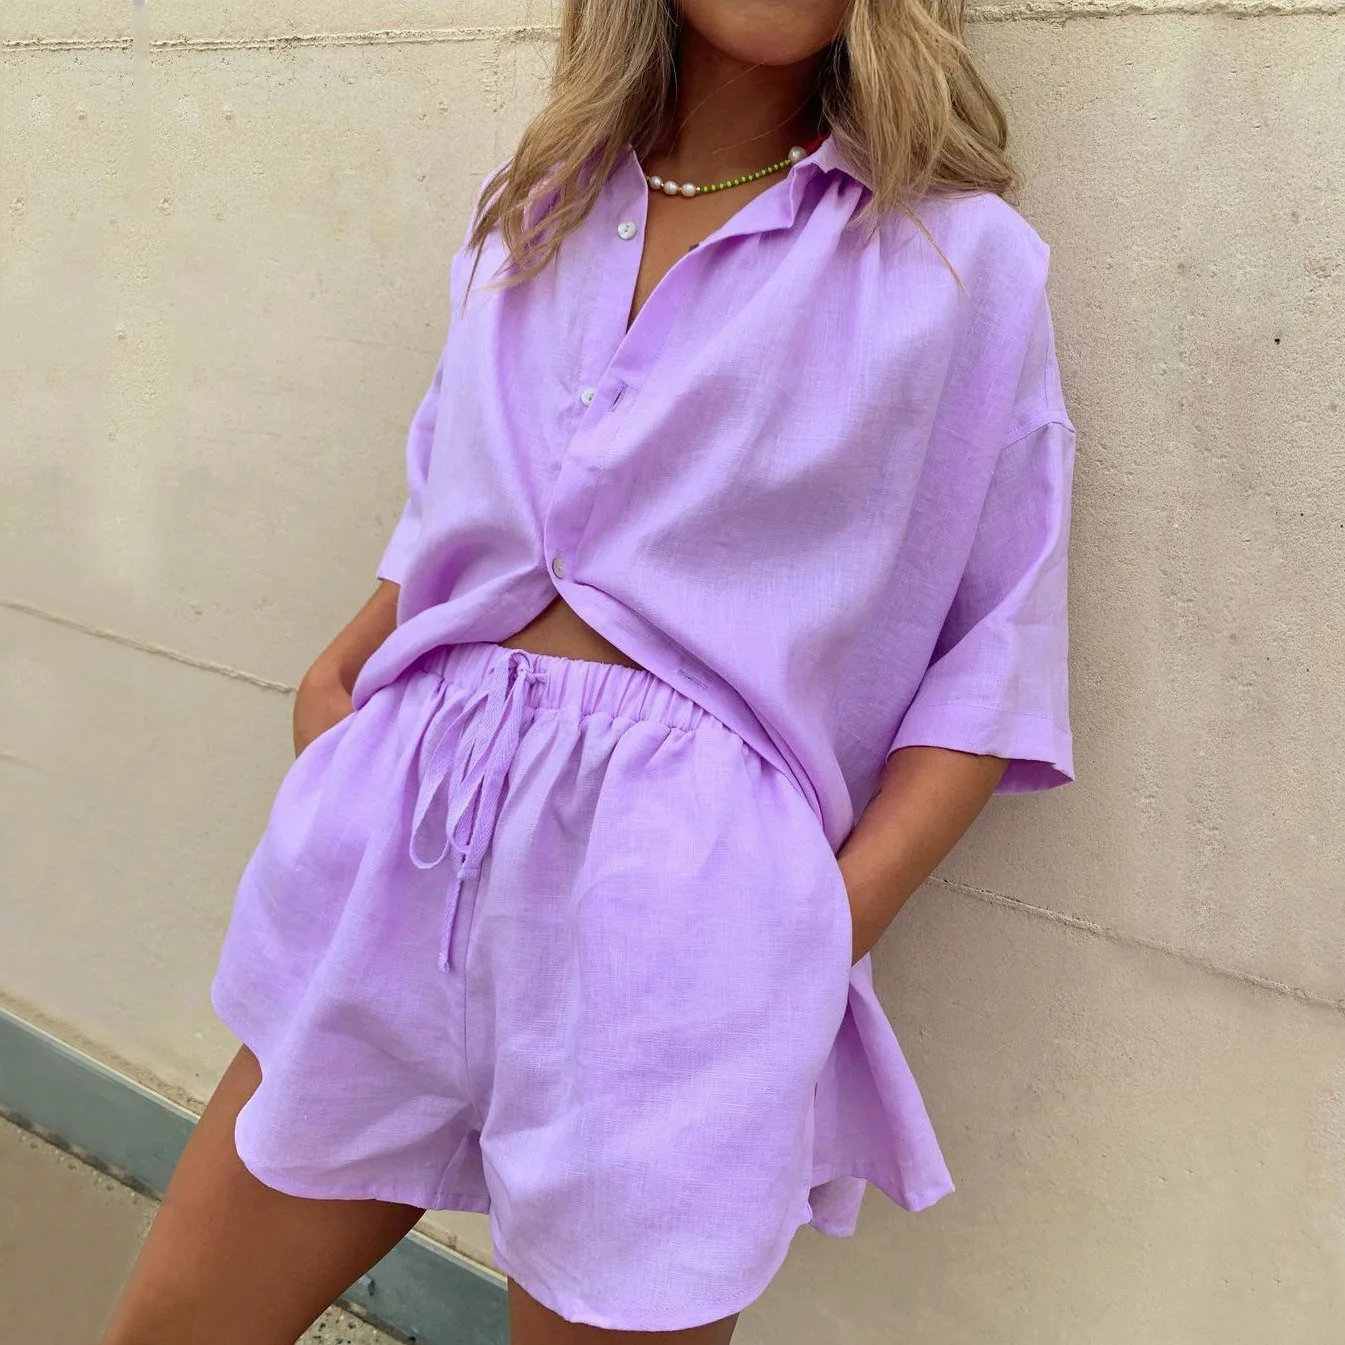 2022 Summer Loose Shirt Shorts Two Piece Set Holiday Style T-shirt Short Pants Suit New Fashion Women Outfits 2-piece fitting